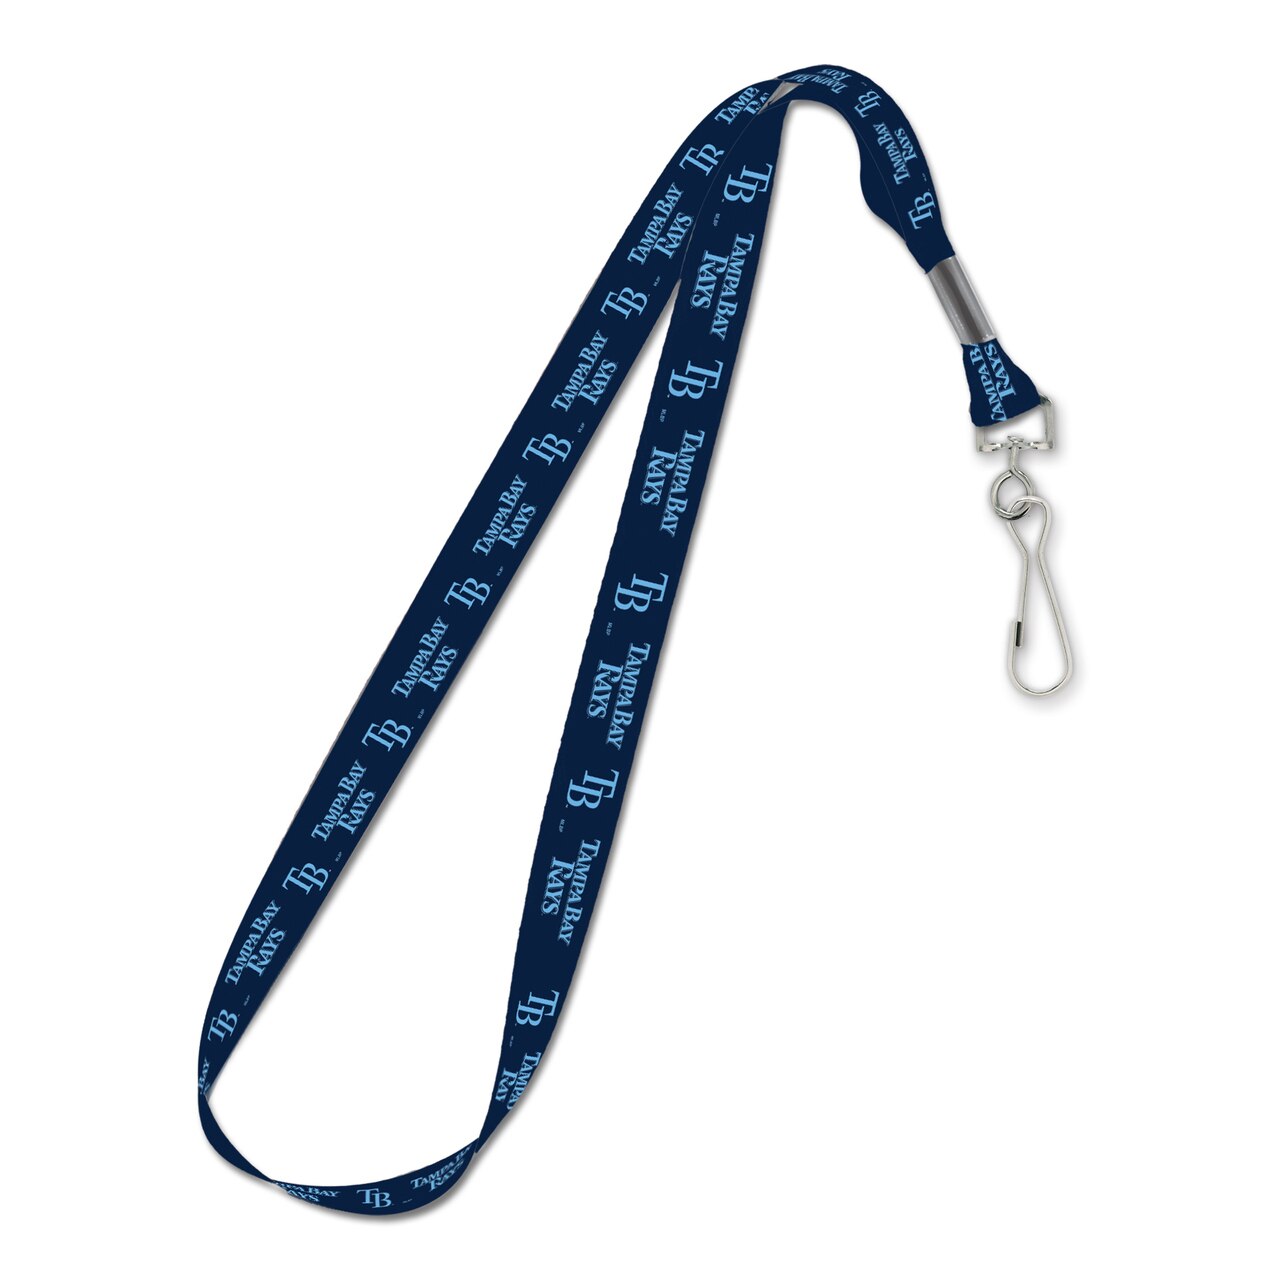 Tampa Bay Rays Lanyard 3/4 Inch by Wincraft